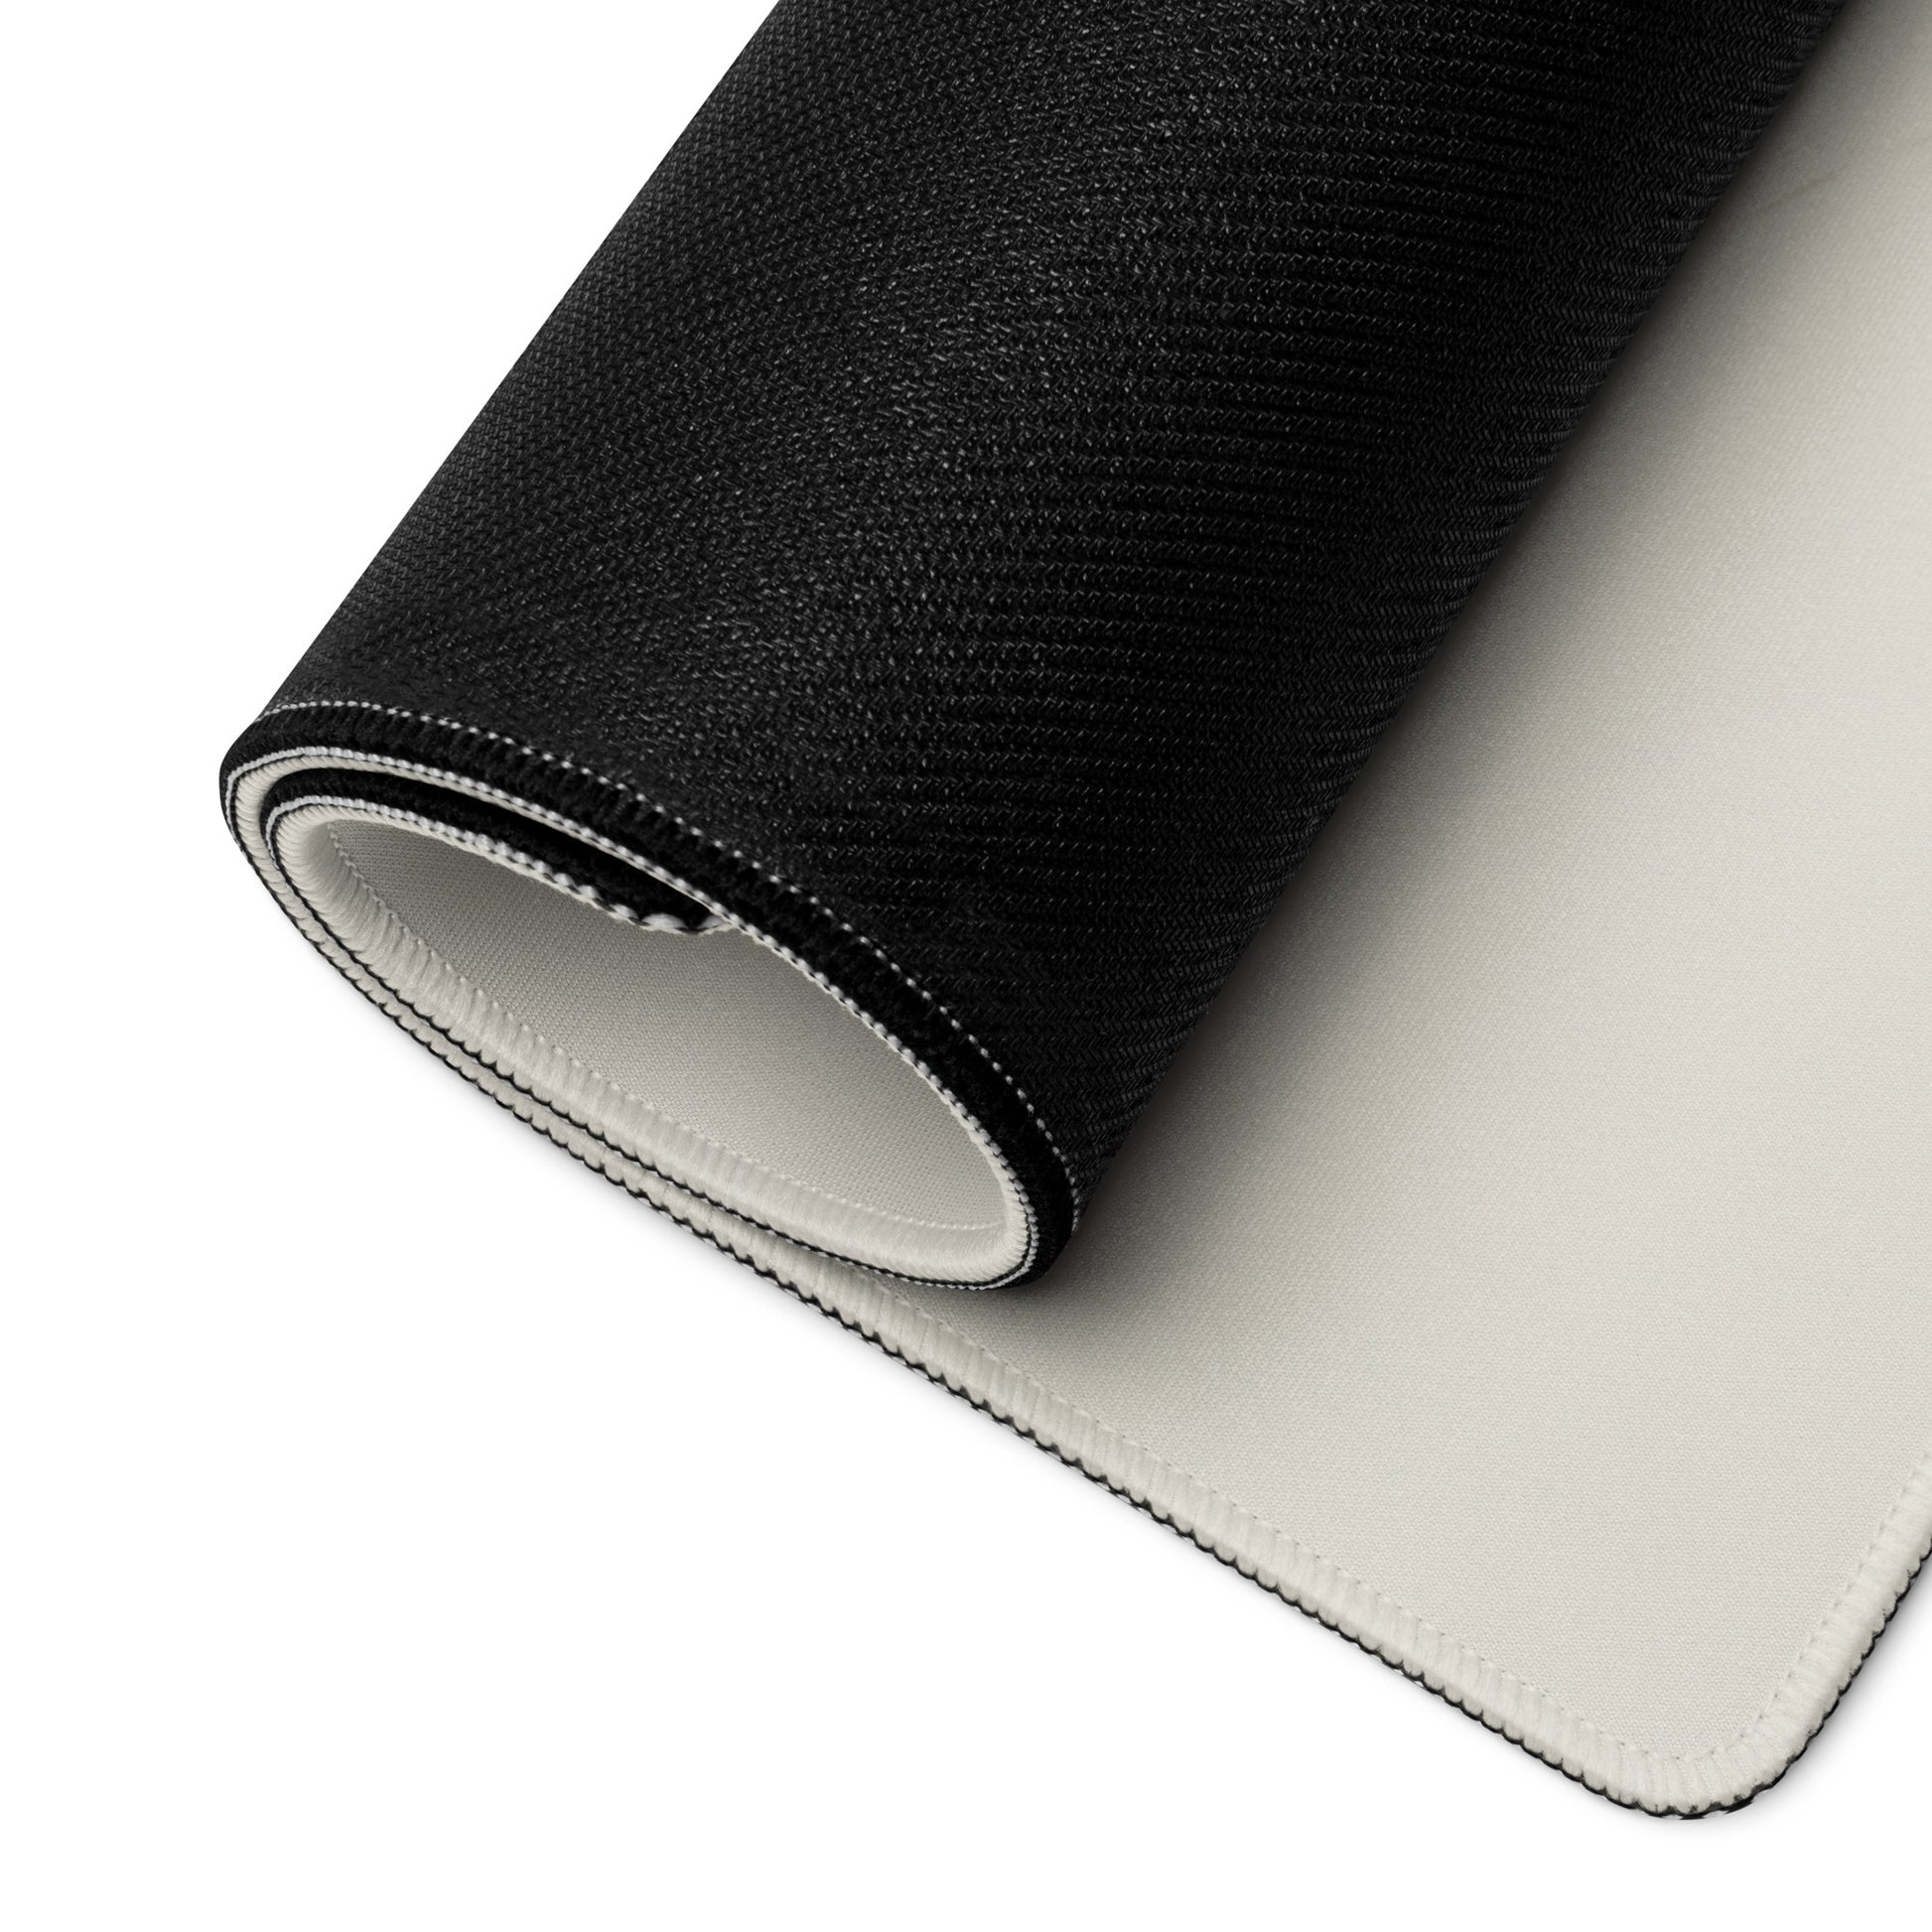 A desk pad with two fast formula one cars on the sides rolled up. Beige in color.